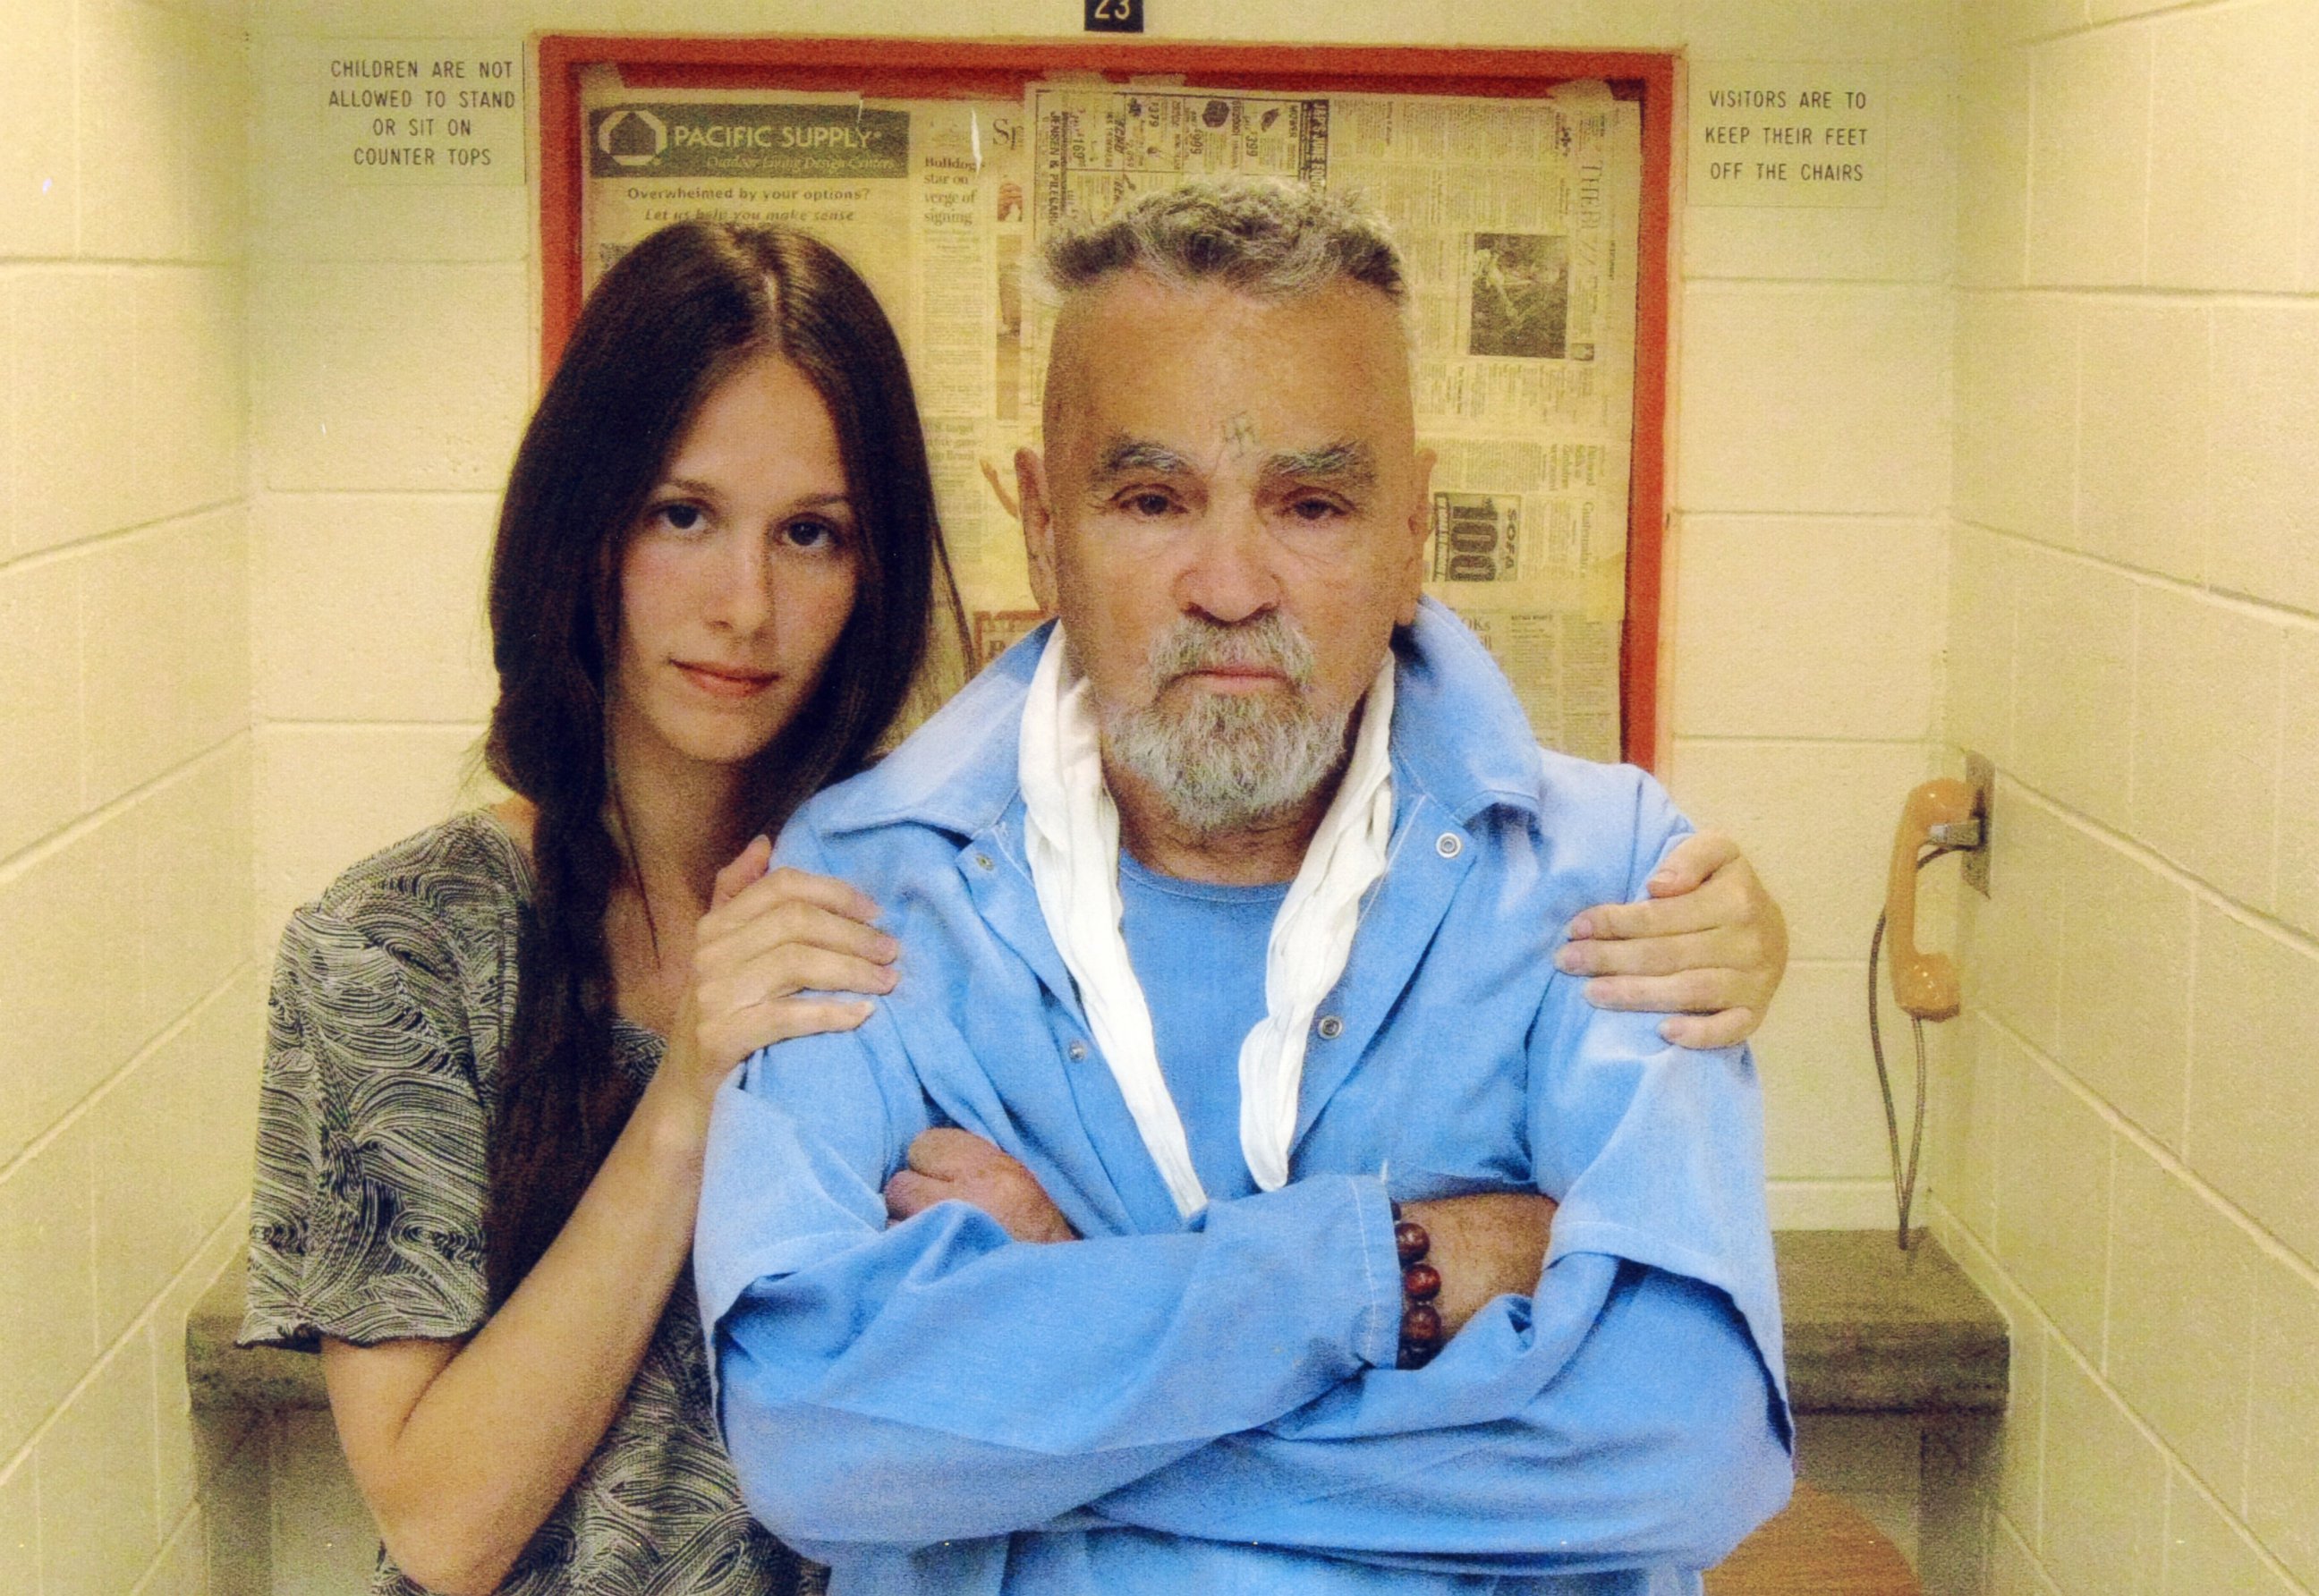 PHOTO: Charles Manson is photographed with Star, June 13, 2010.